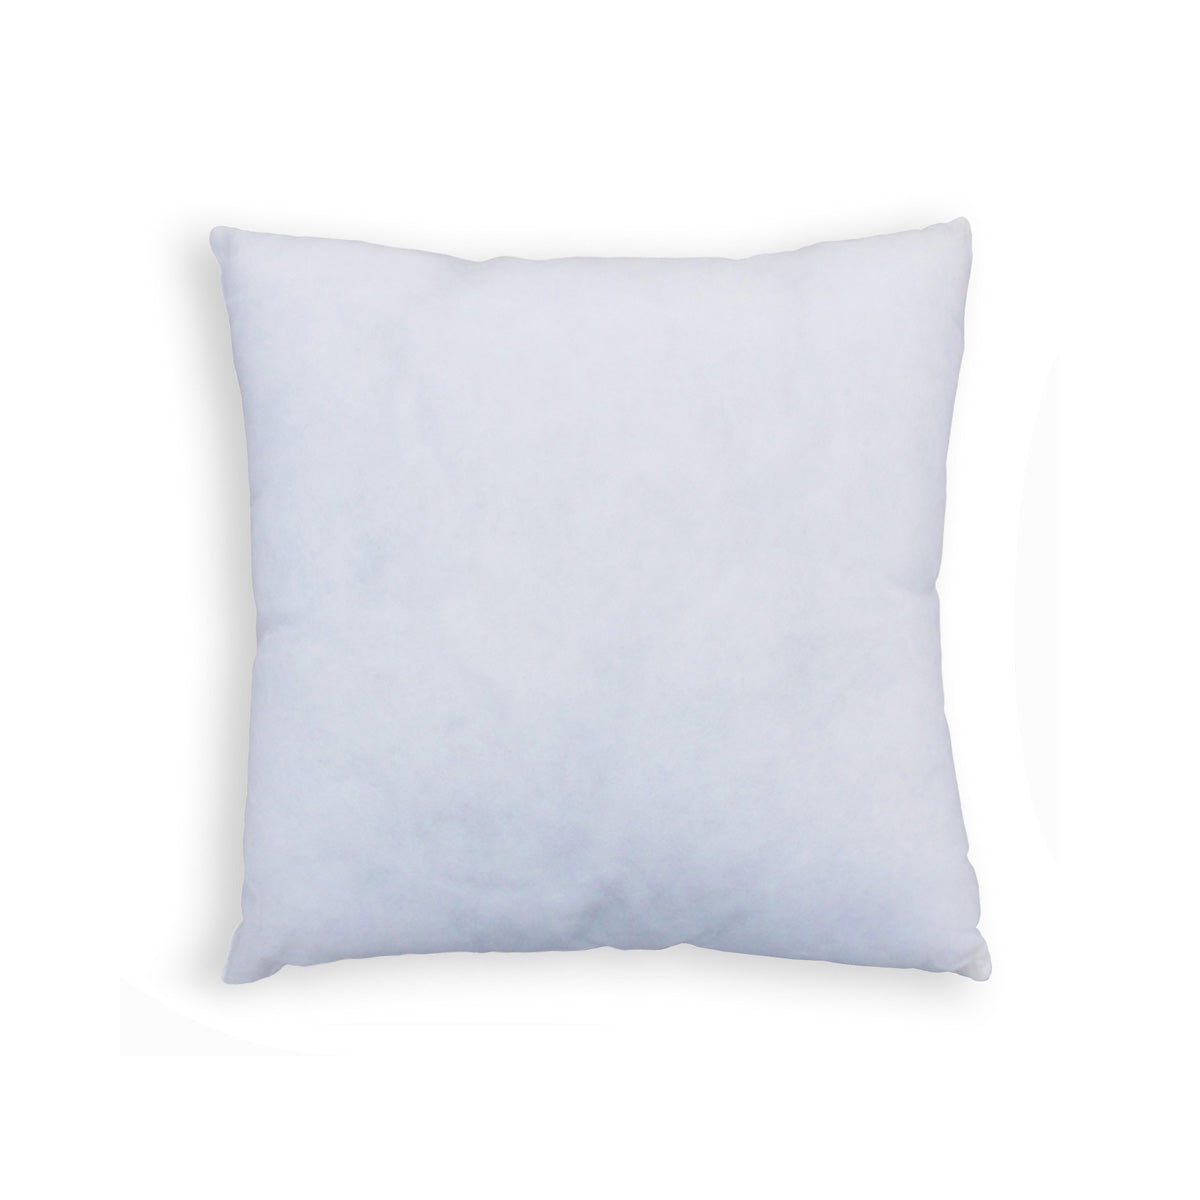 Pillow insert, square, non woven polyester cover with polyfibre filling, sizes available